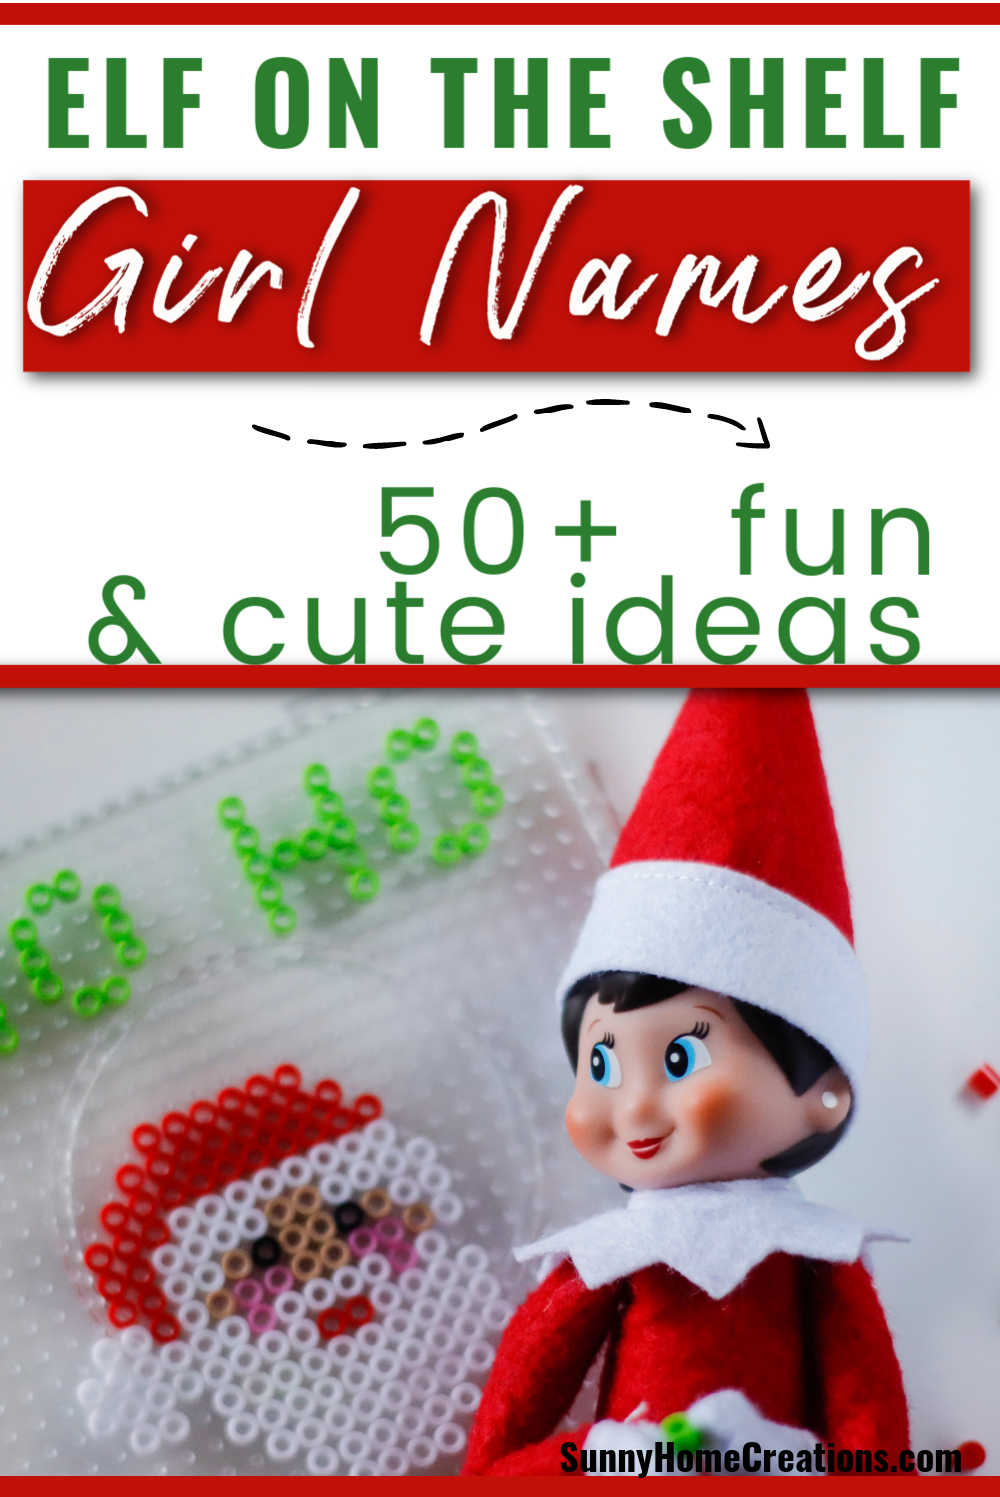 Pin image: top says "Elf on the Shelf Girl Names -> 50+ fun & cute ideas" and bottom has a pic of a female elf making a craft.